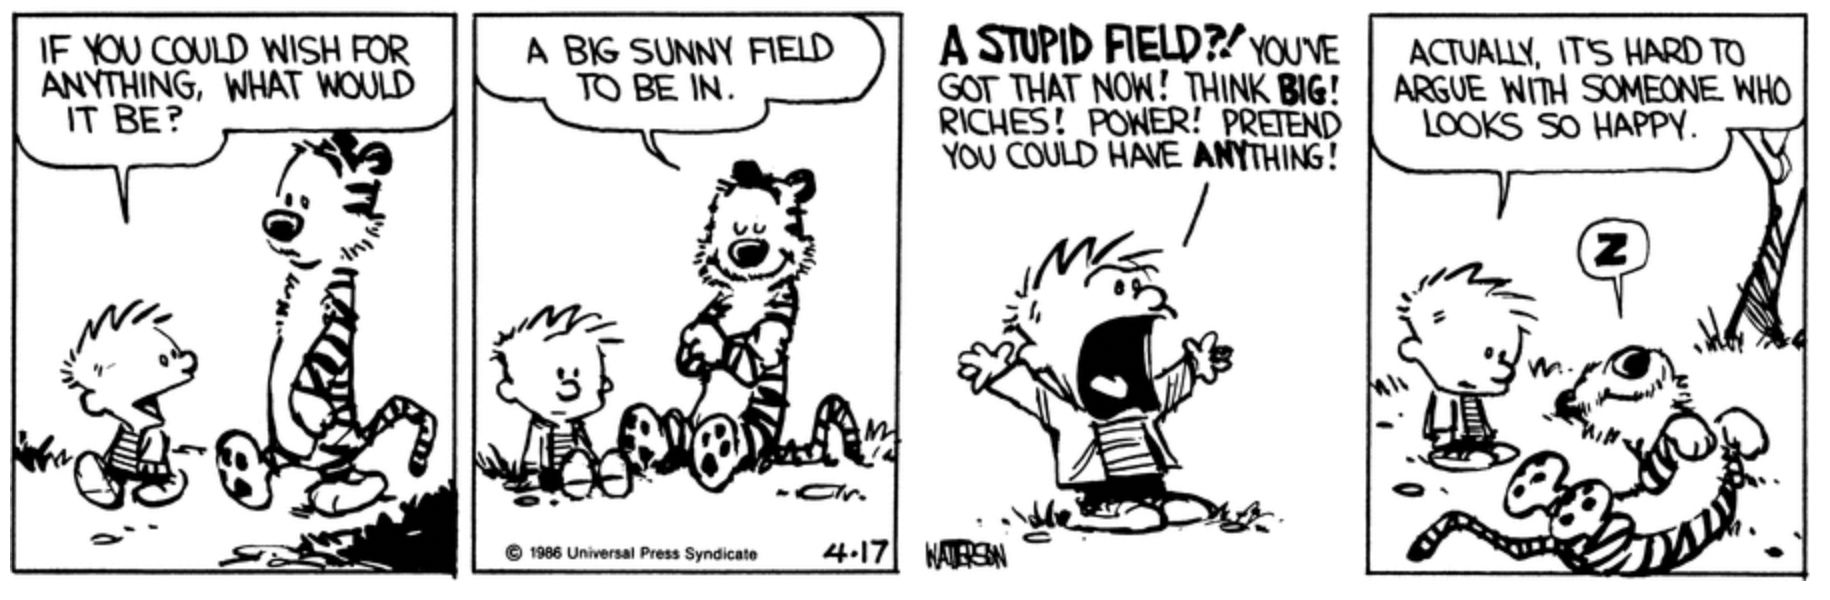 The sunny field in Calvin and Hobbes